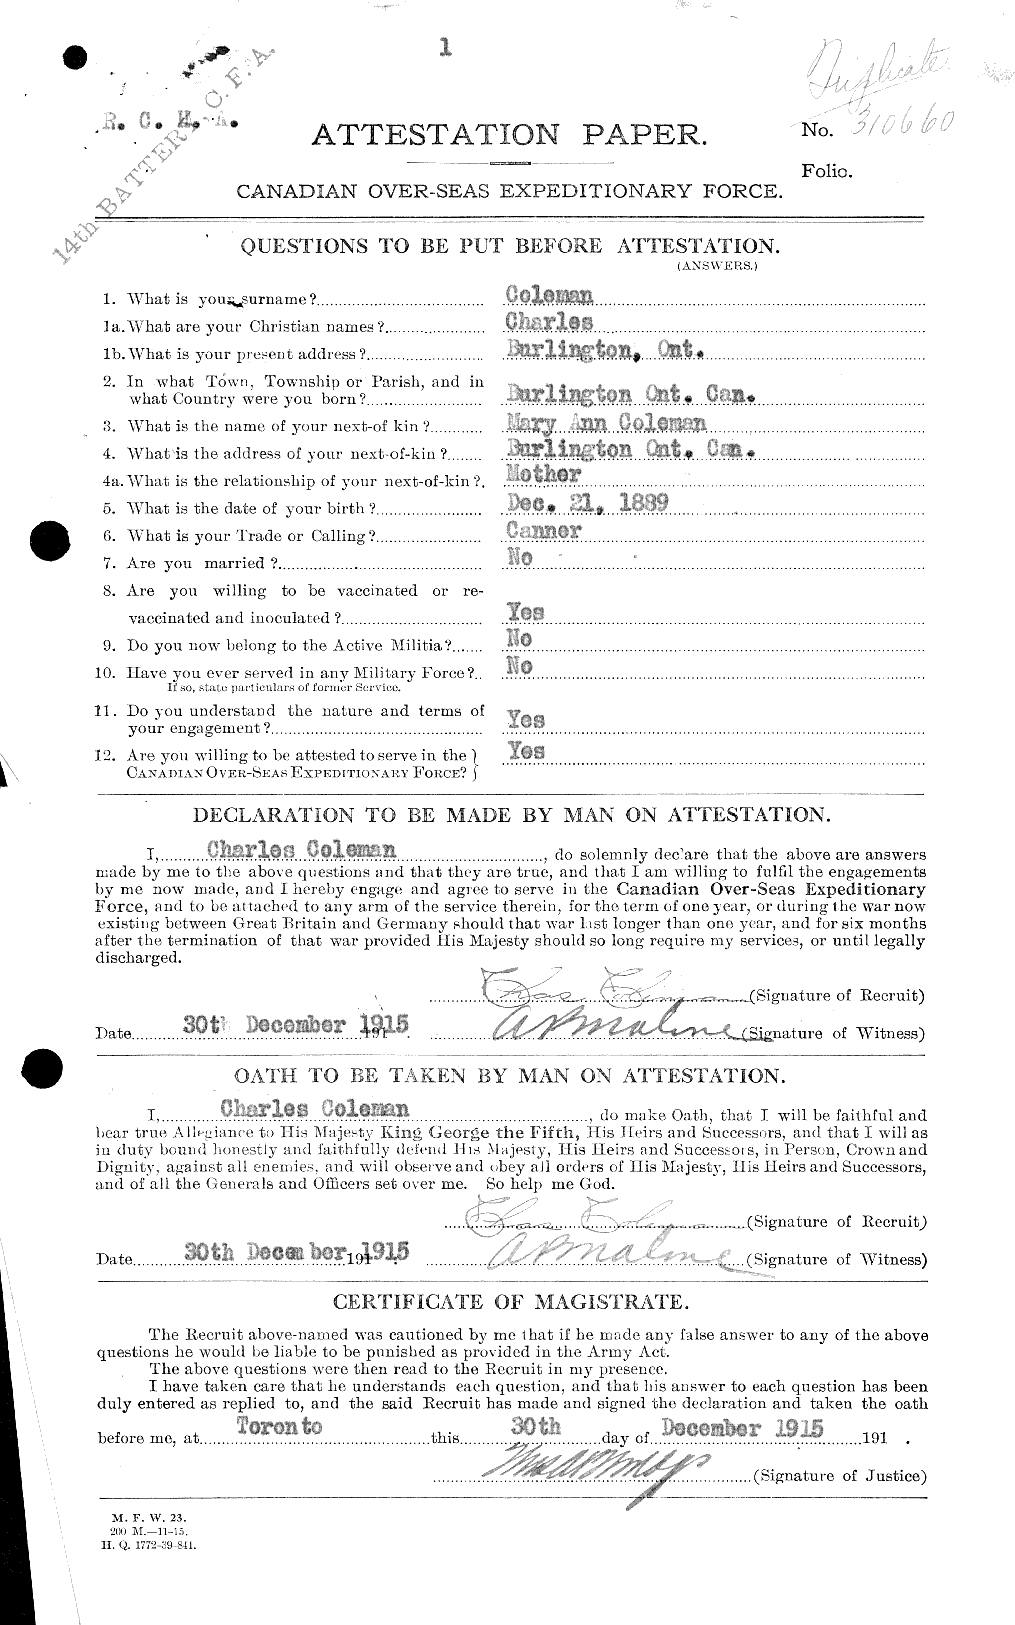 Personnel Records of the First World War - CEF 028074a